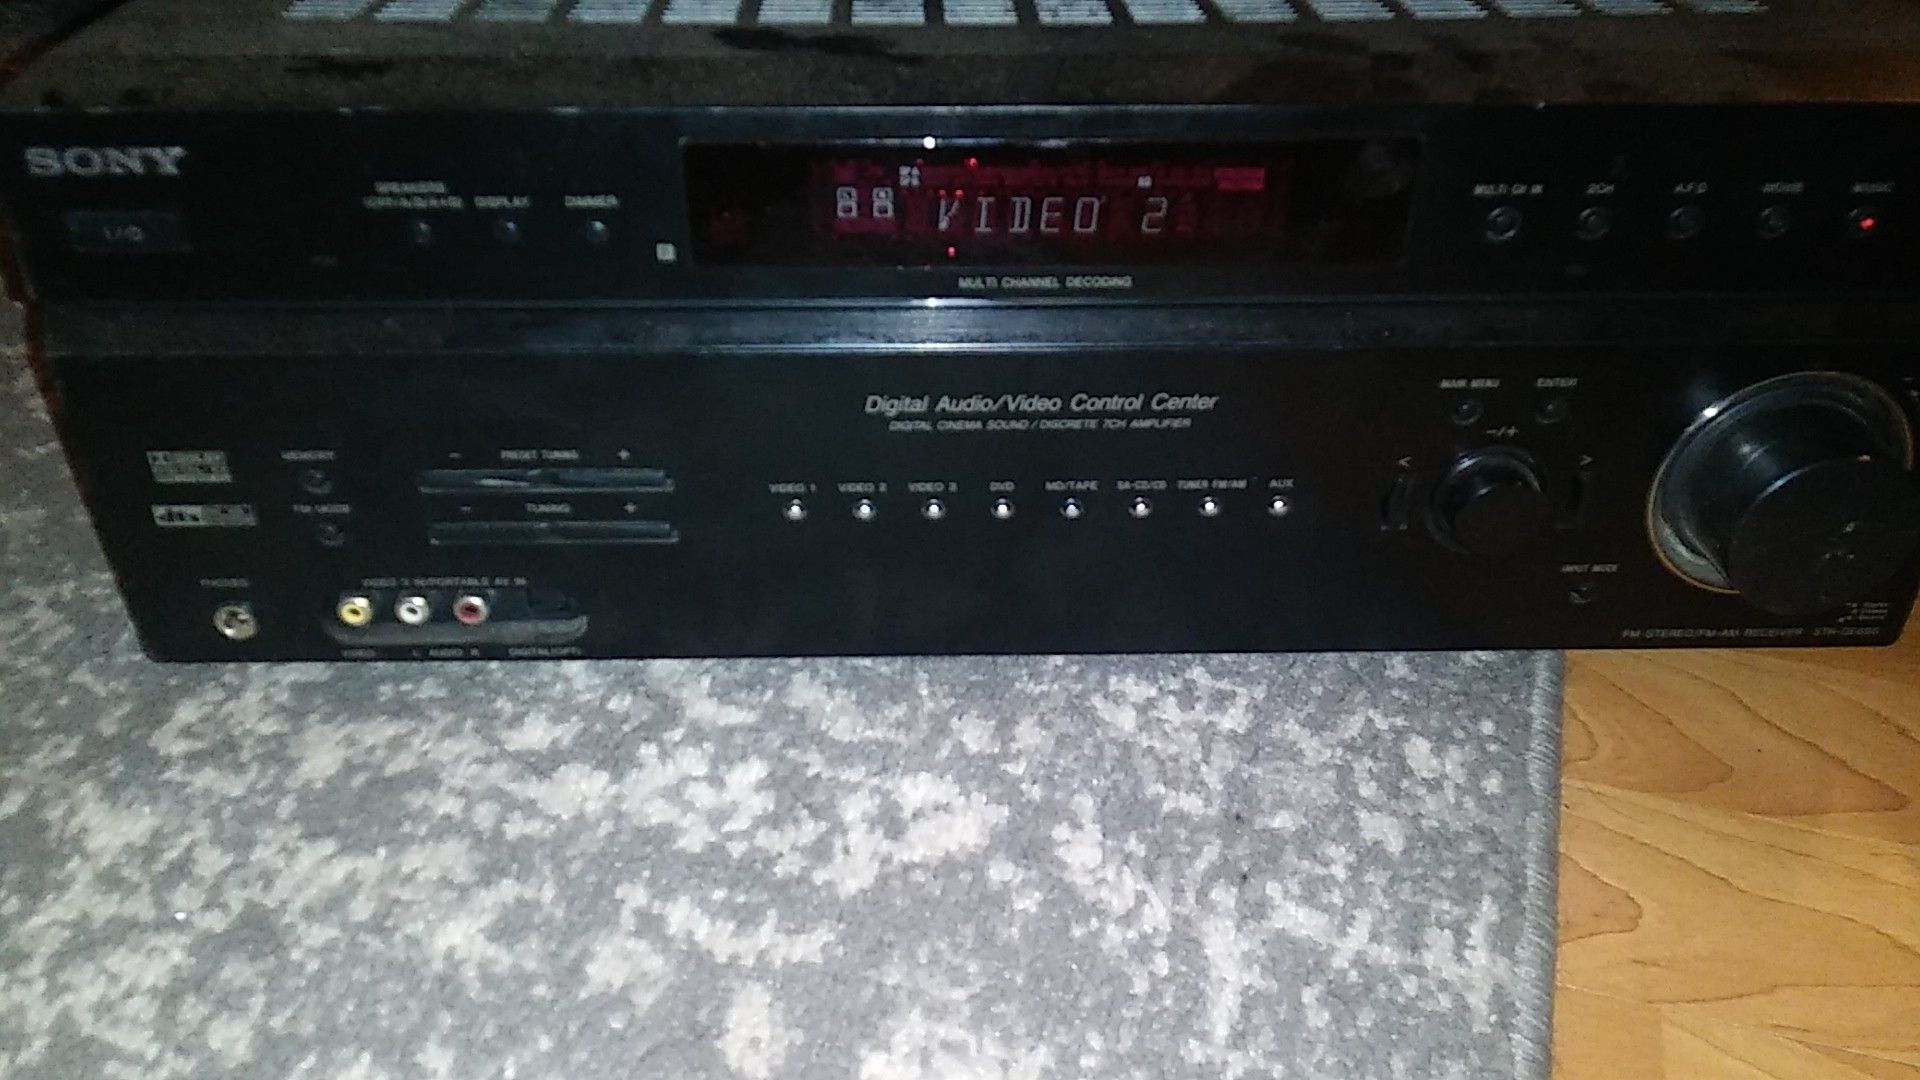 2 vintage receivers working very well great condition